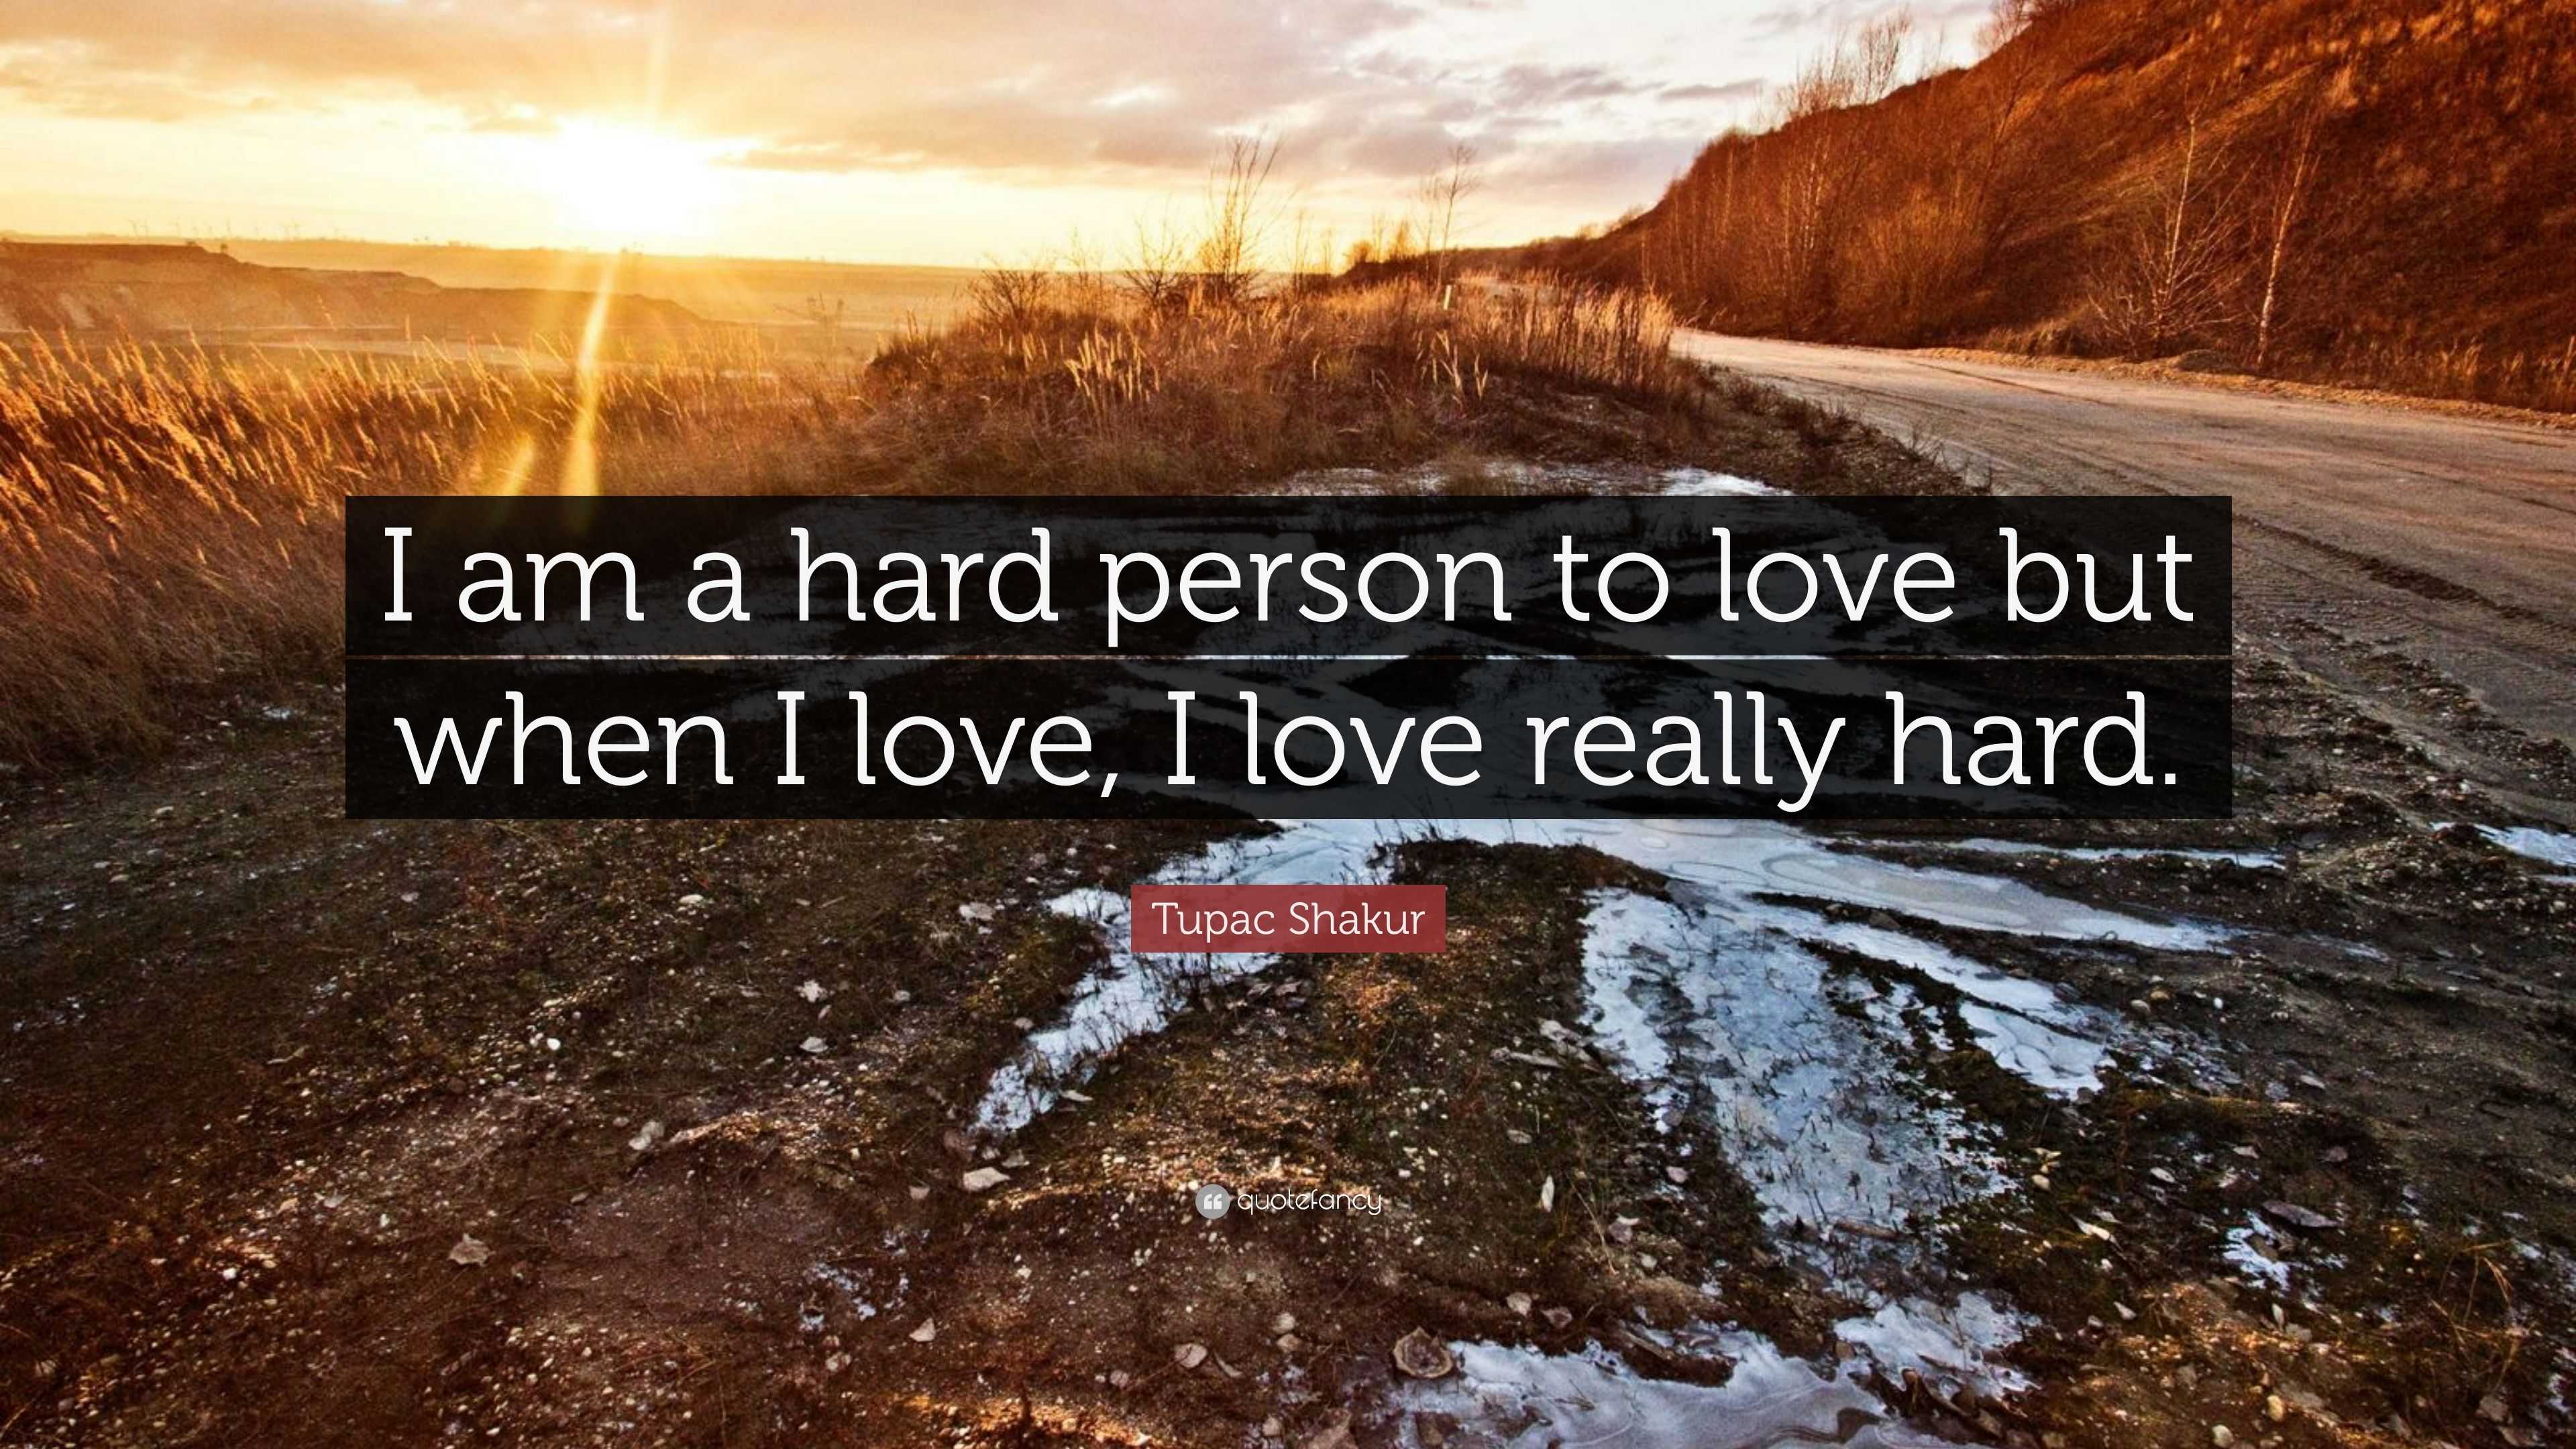 https://quotefancy.com/media/wallpaper/3840x2160/2073237-Tupac-Shakur-Quote-I-am-a-hard-person-to-love-but-when-I-love-I.jpg